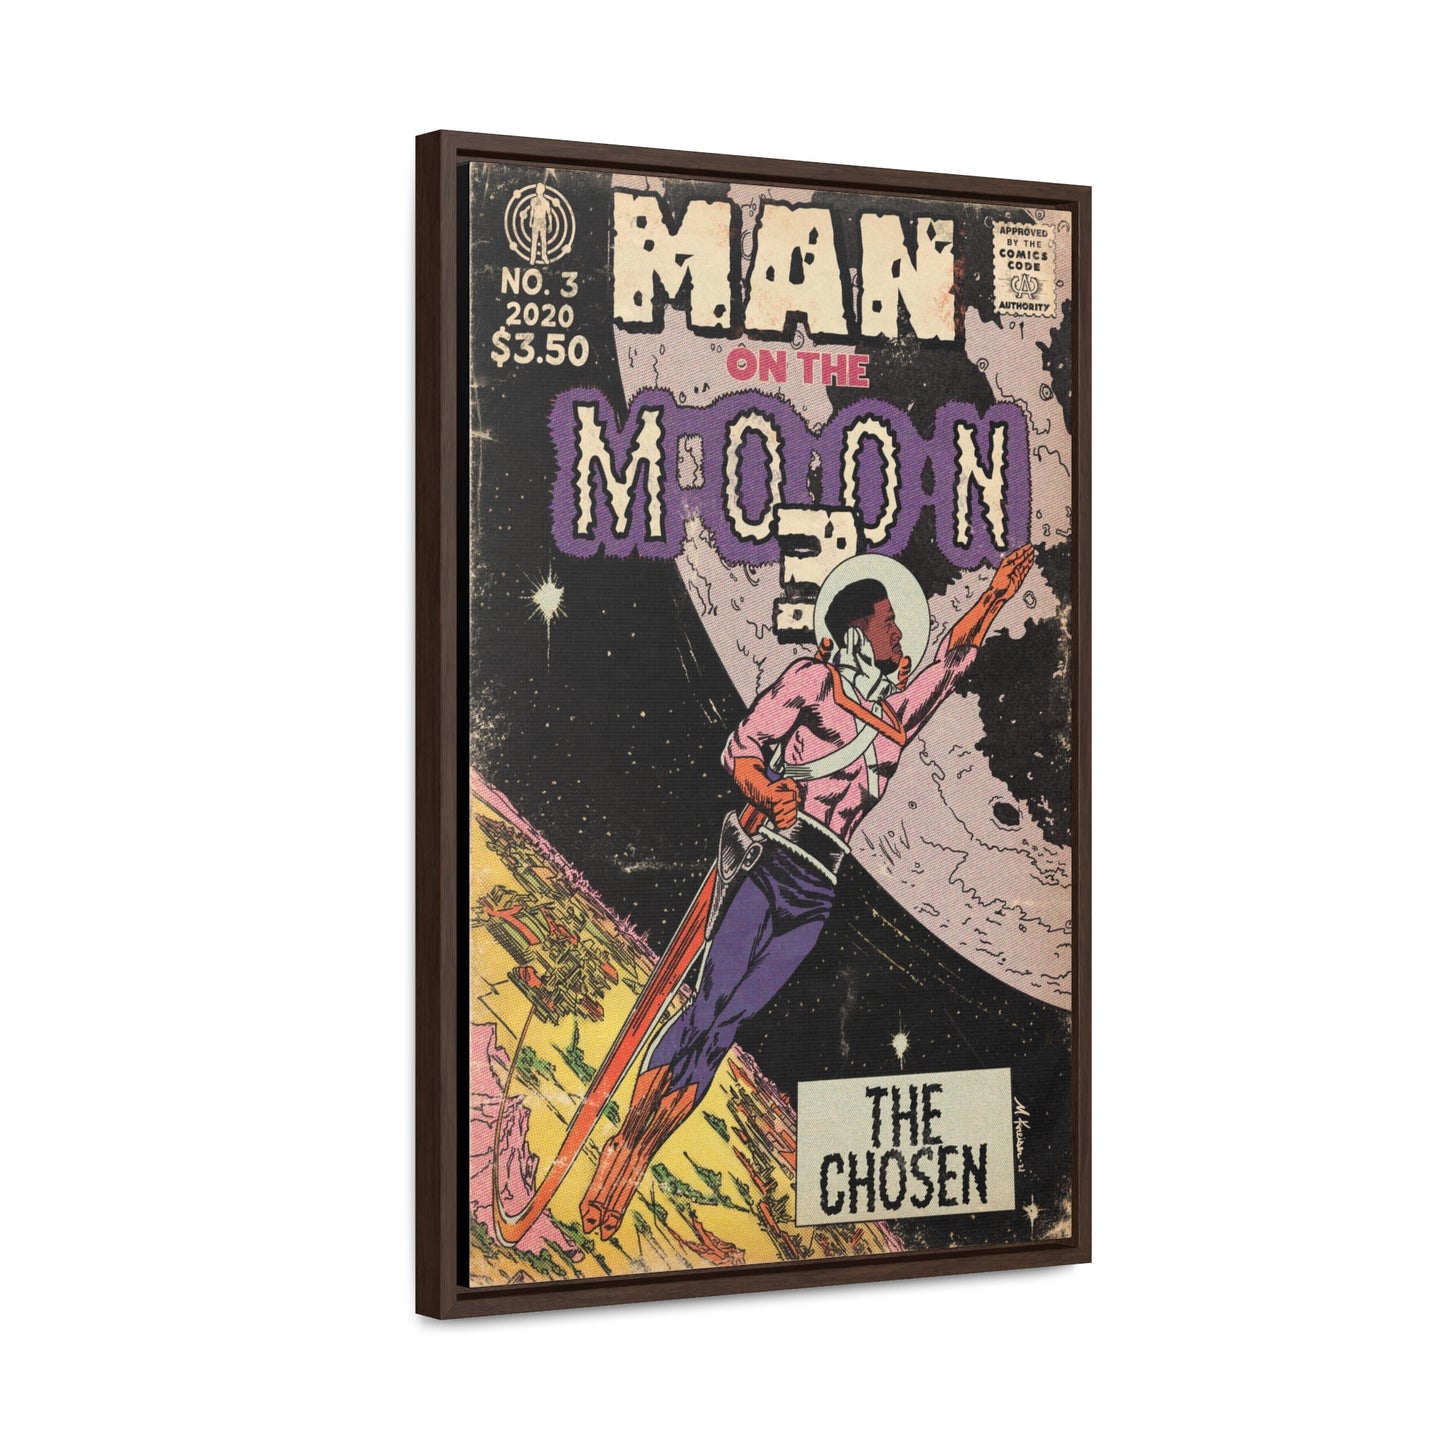 Kid Cudi - Man on the Moon 3 - Gallery Canvas Wraps, Vertical Frame